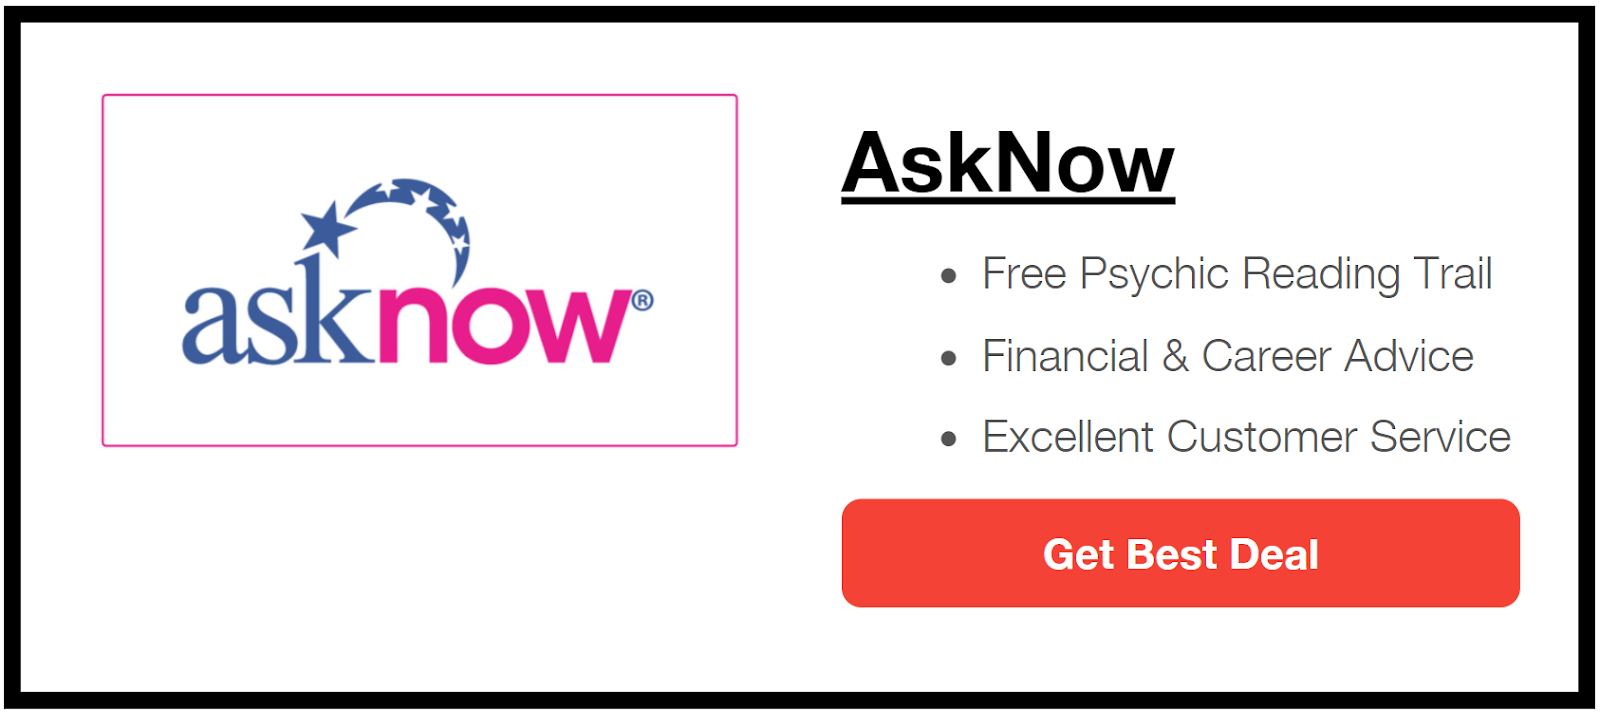 AskNow logo with some deals on the right